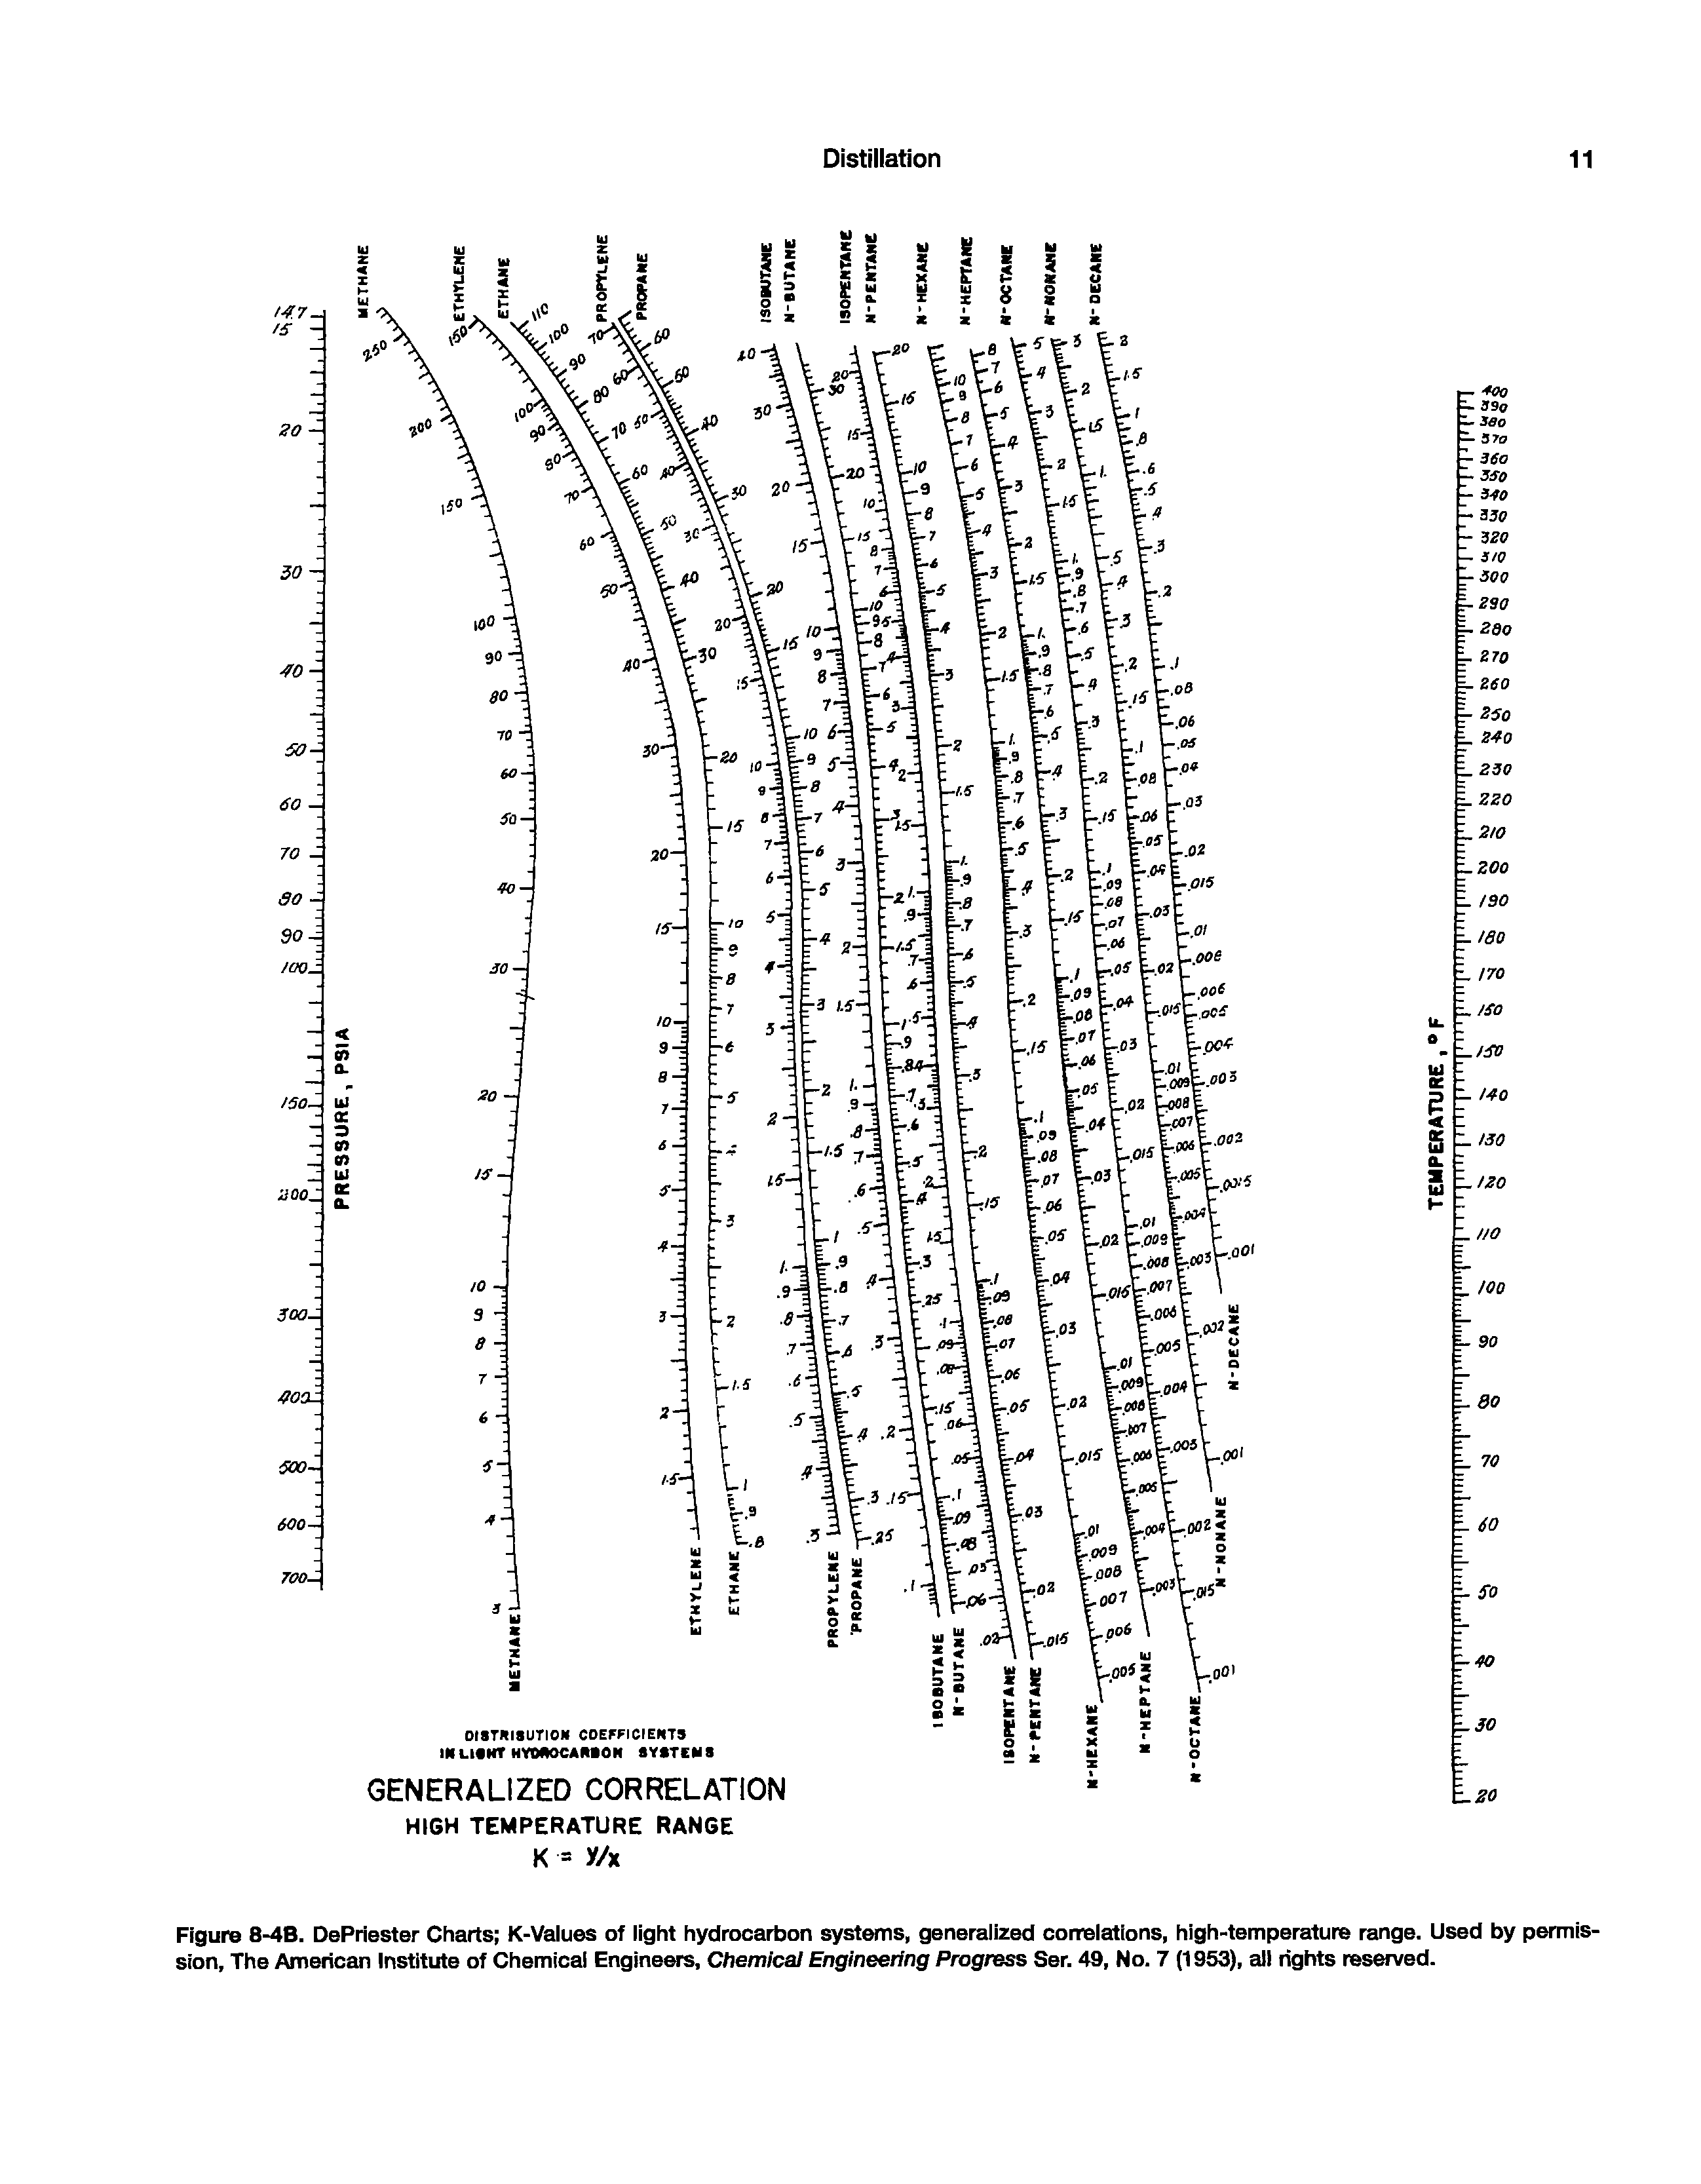 Figure 8-4B. DePriestsr Charts K-Values of light hydrocarbon syst s, generalized correlations, high-temperature range. Used by permission, The American Institute of Chemical Engineers, Chemicai Engineering Progress Ser. 49, No. 7 (1953), all rights reserved.